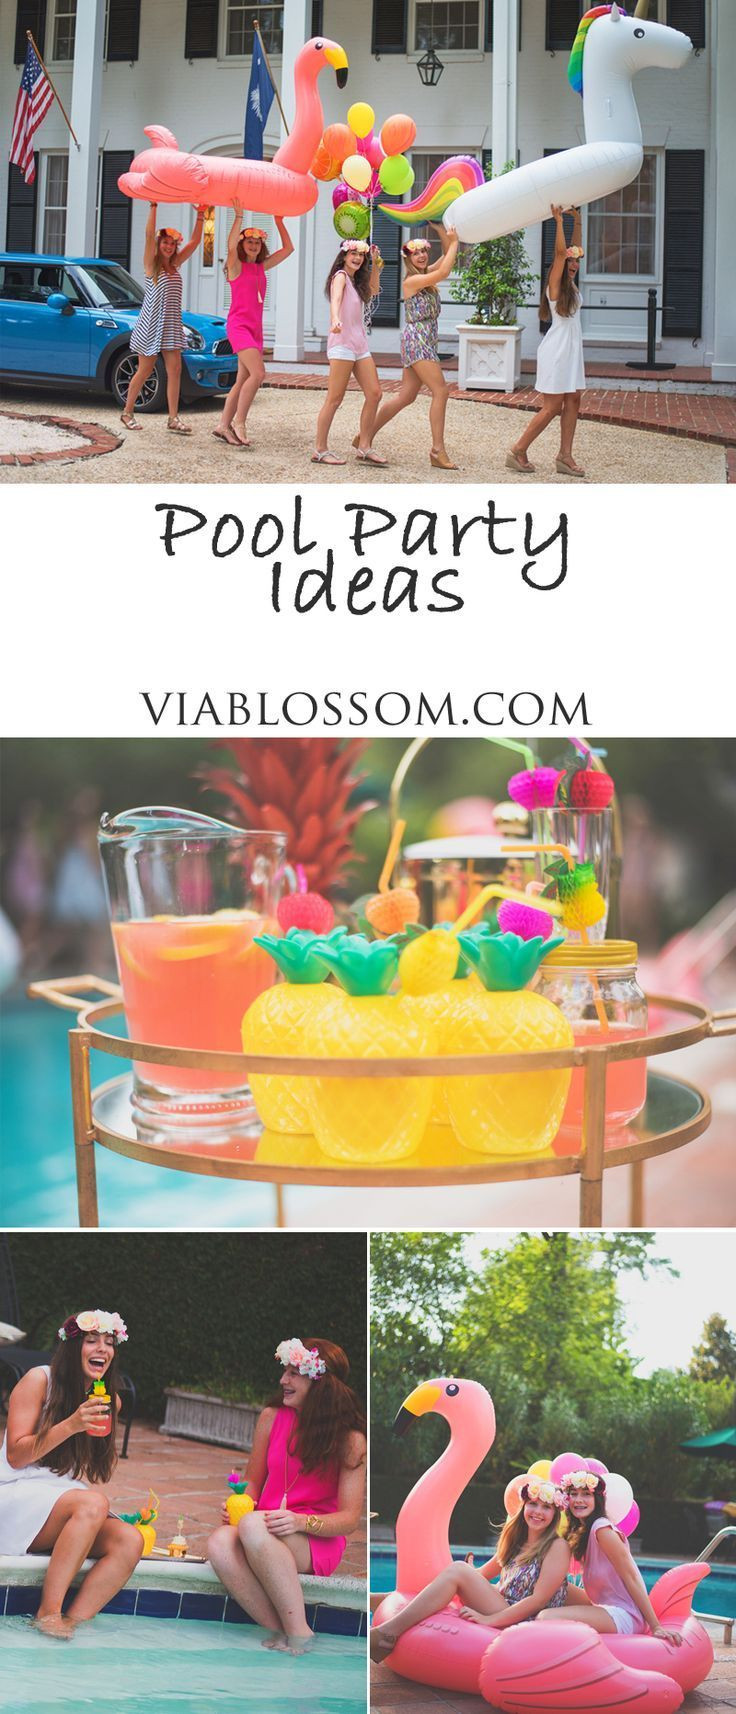 Indoor Beach Party Ideas For Adults
 Pool Party Ideas